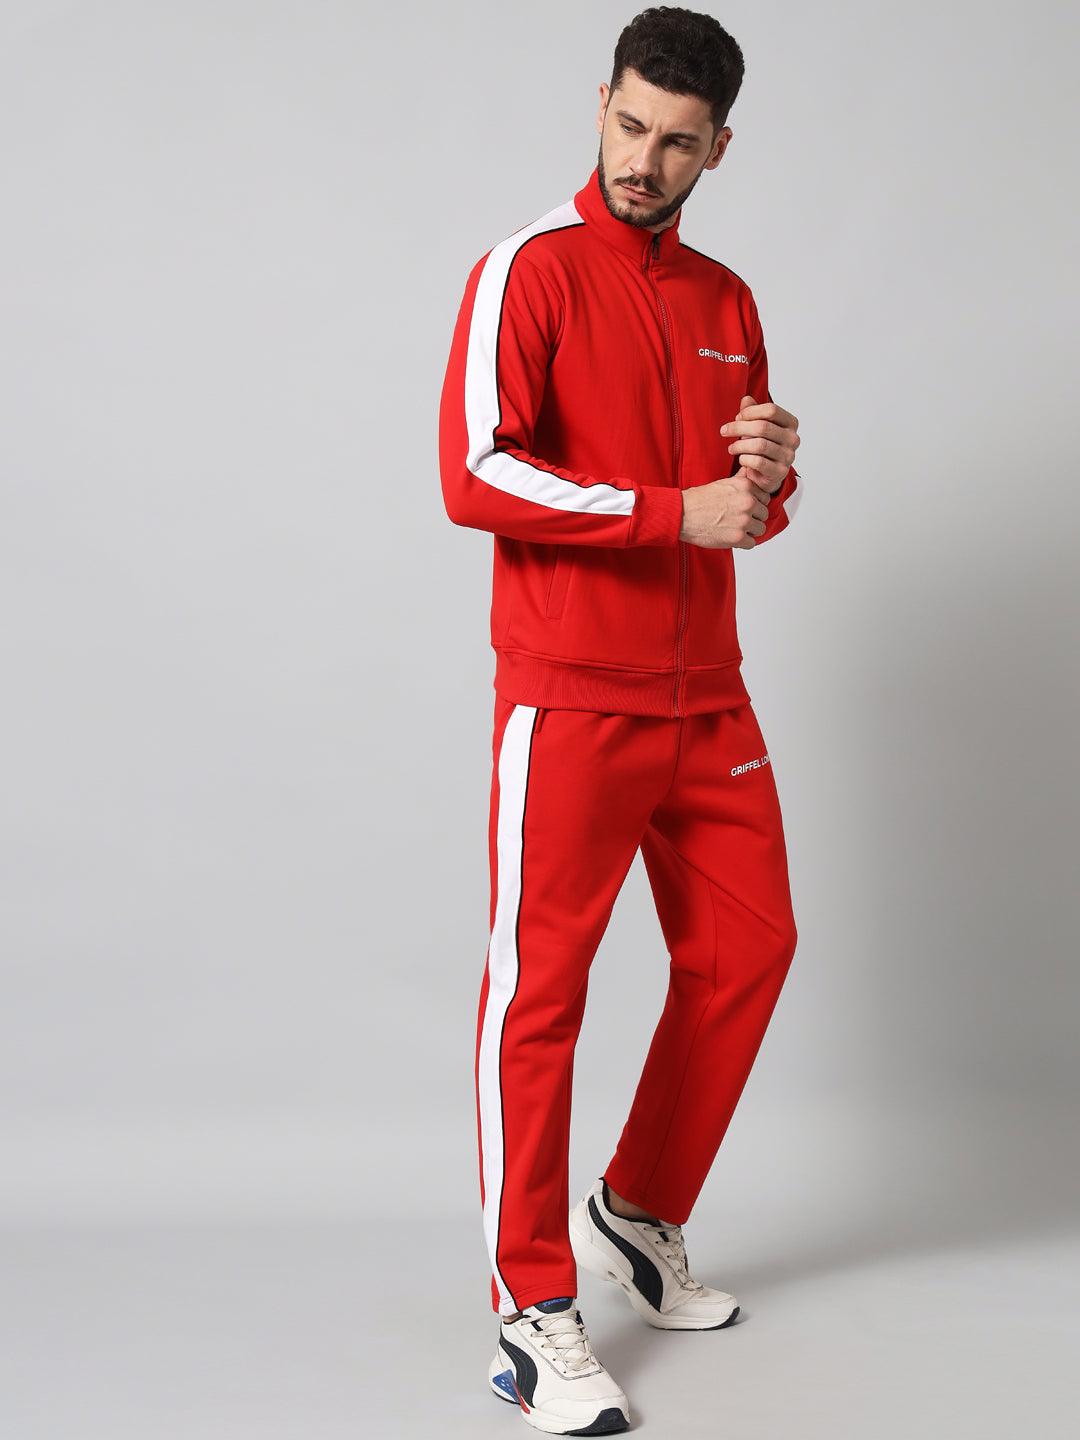 Griffel Men's Color Blocked Front Logo Fleece Zipper and Jogger Full set Red Tracksuit - griffel